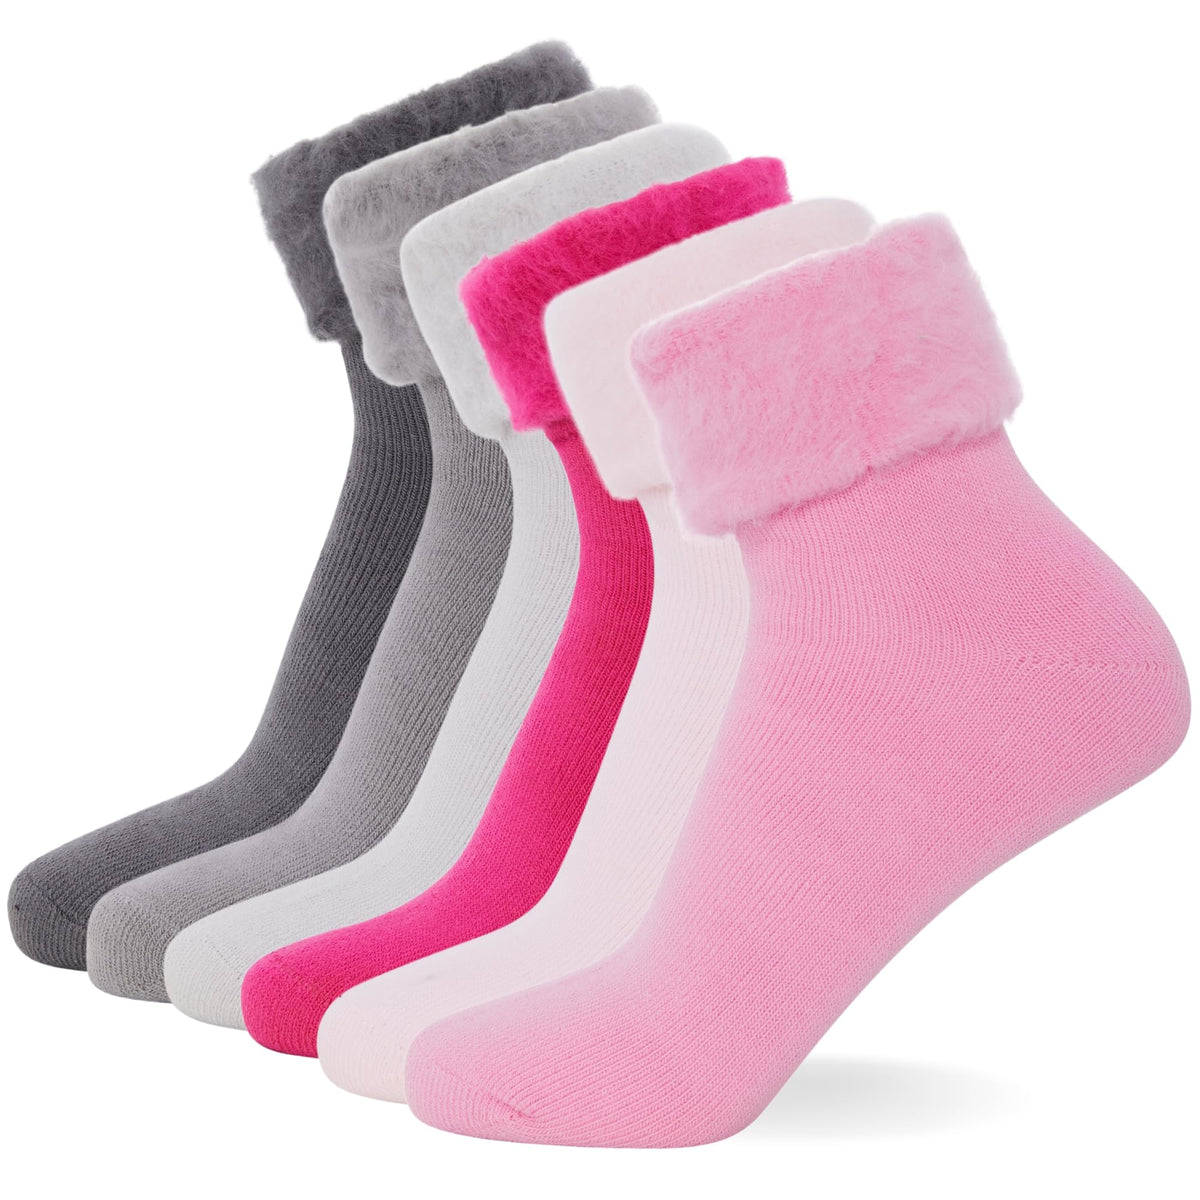 FM London (6-Pack) Extra Warm WomenÃƒÆ’Ã‚Â¢ÃƒÂ¢Ã¢â‚¬Å¡Ã‚Â¬ÃƒÂ¢Ã¢â‚¬Å¾Ã‚Â¢s Super Soft Thermal Bed Socks in Pastel Colours (Size:UK 4-8) - Fluffy Socks Womens Ideal for Cold Evenings - Fleece Lining, Cosy, Comfortable